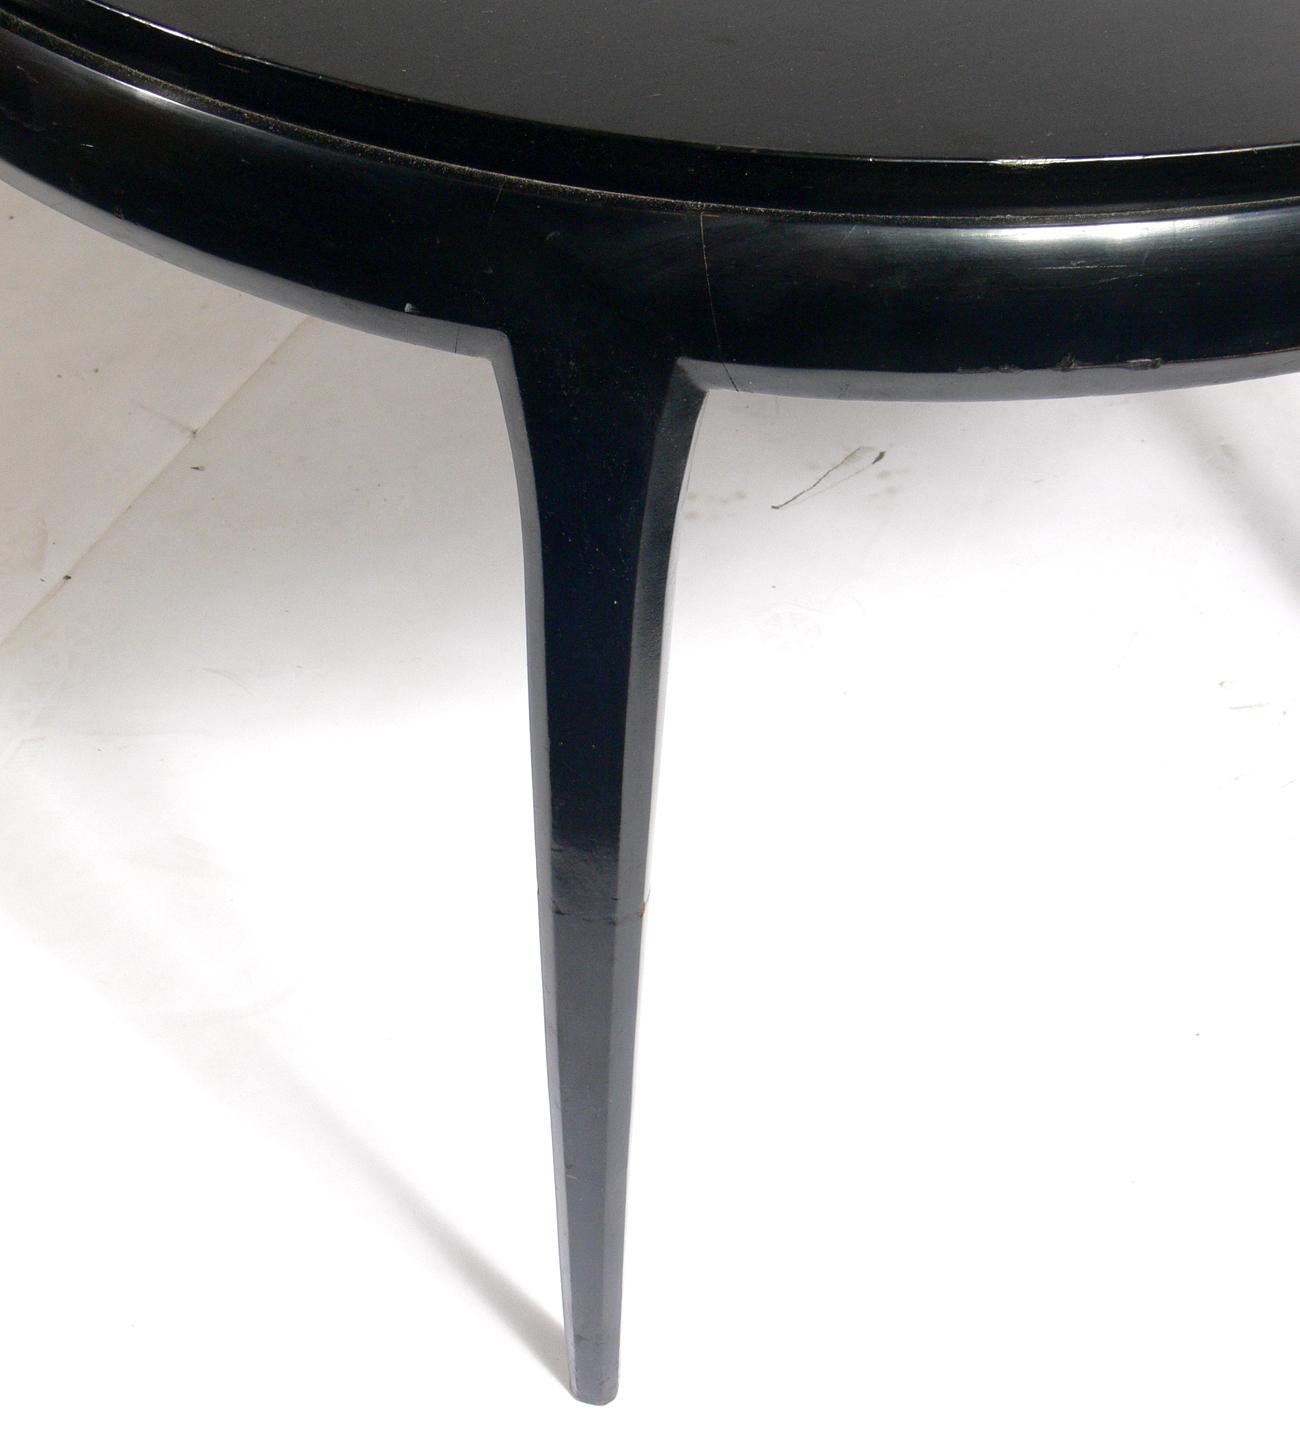 Asian inspired midcentury dining table, originally retailed through John Stuart NYC, American, circa 1960s. Elegant tapered legs. This table is currently being refinished and can be completed in your choice of color. The price noted below includes